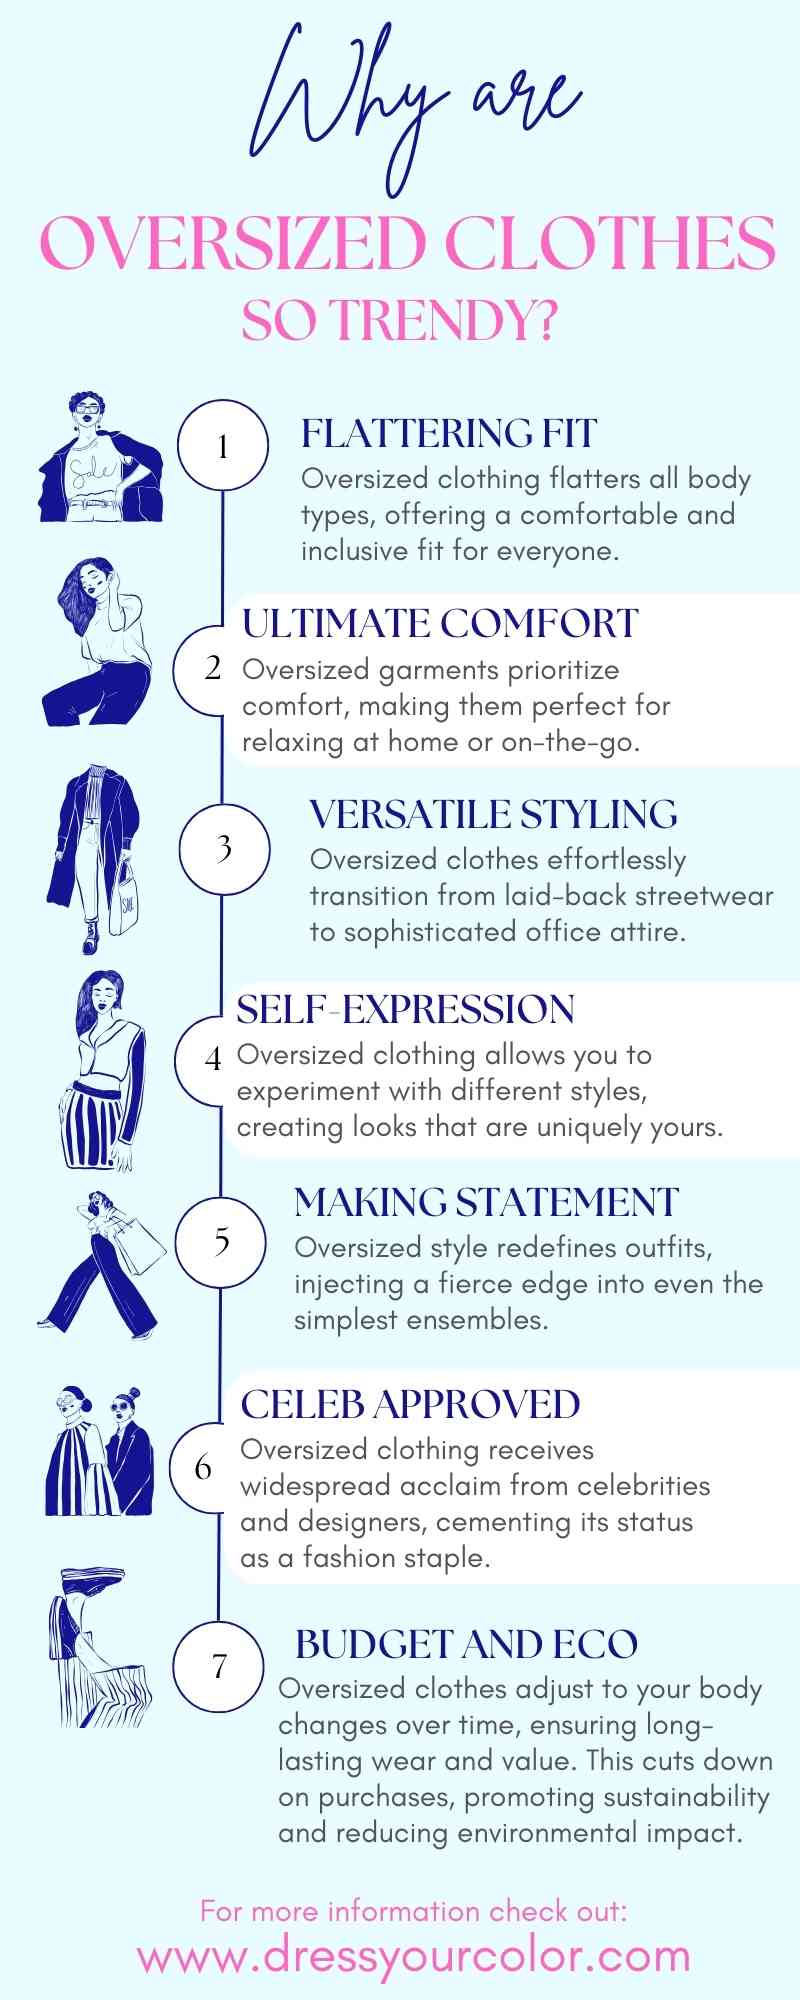 infographic summary of Why are oversized clothes so trendy? 7 reasons why oversized trend is popular